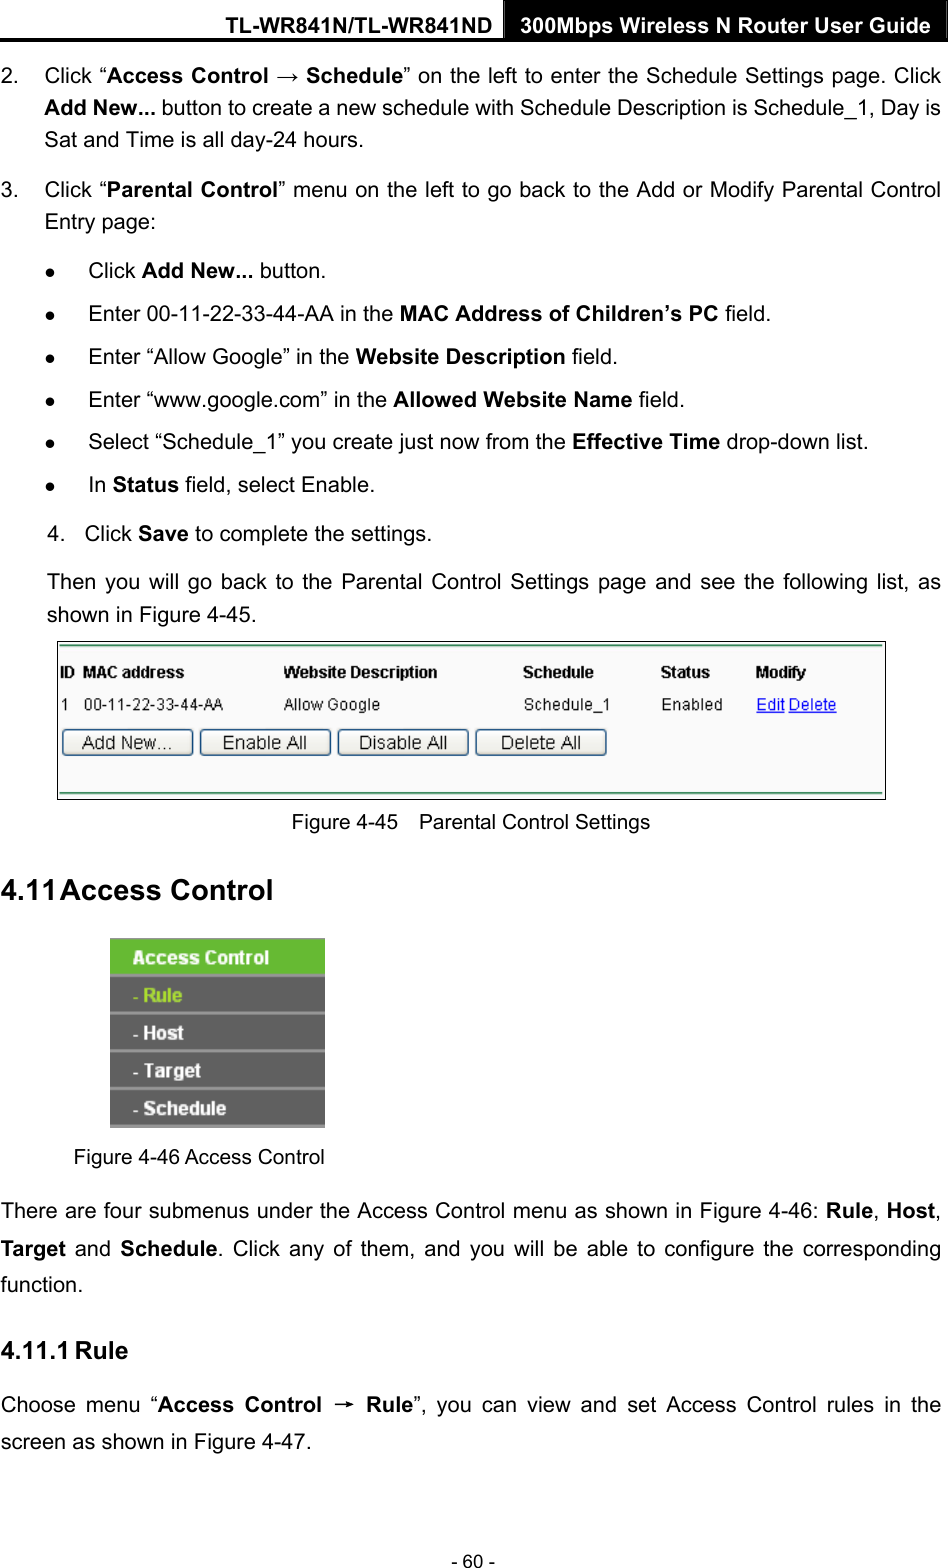 TL-WR841N/TL-WR841ND 300Mbps Wireless N Router User Guide - 60 - 2. Click “Access Control → Schedule” on the left to enter the Schedule Settings page. Click Add New... button to create a new schedule with Schedule Description is Schedule_1, Day is Sat and Time is all day-24 hours.   3. Click “Parental Control” menu on the left to go back to the Add or Modify Parental Control Entry page:   z Click Add New... button.   z Enter 00-11-22-33-44-AA in the MAC Address of Children’s PC field.   z Enter “Allow Google” in the Website Description field.   z Enter “www.google.com” in the Allowed Website Name field.   z Select “Schedule_1” you create just now from the Effective Time drop-down list.   z In Status field, select Enable.   4. Click Save to complete the settings. Then you will go back to the Parental Control Settings page and see the following list, as shown in Figure 4-45.  Figure 4-45    Parental Control Settings 4.11 Access Control  Figure 4-46 Access Control There are four submenus under the Access Control menu as shown in Figure 4-46: Rule, Host, Target and Schedule. Click any of them, and you will be able to configure the corresponding function. 4.11.1 Rule Choose menu “Access Control → Rule”, you can view and set Access Control rules in the screen as shown in Figure 4-47.  